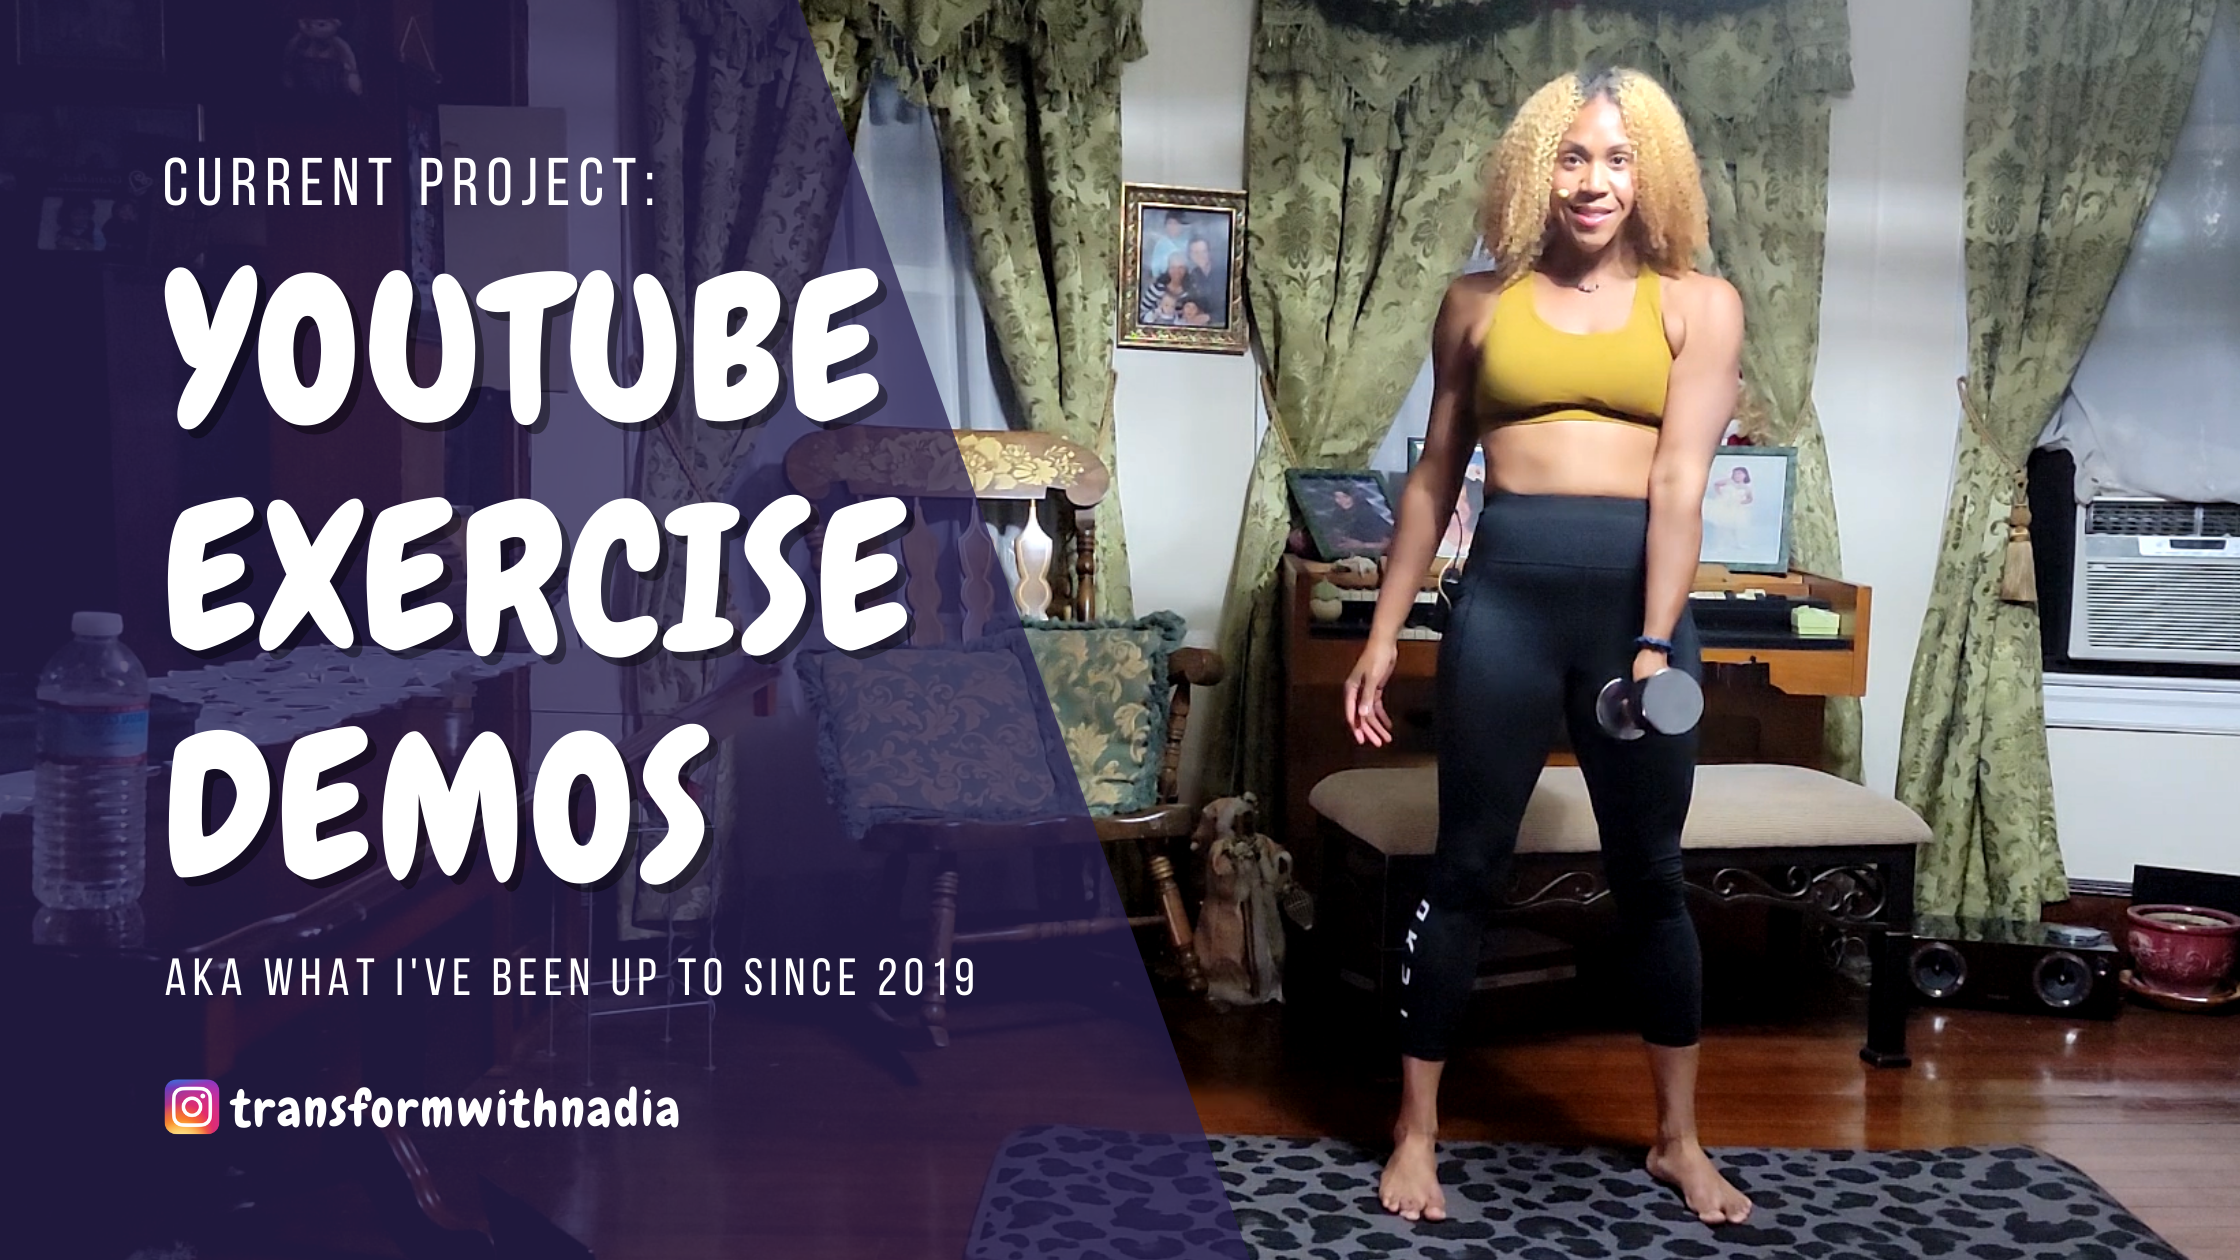 YouTube Exercise Demos from Transform with Nadia